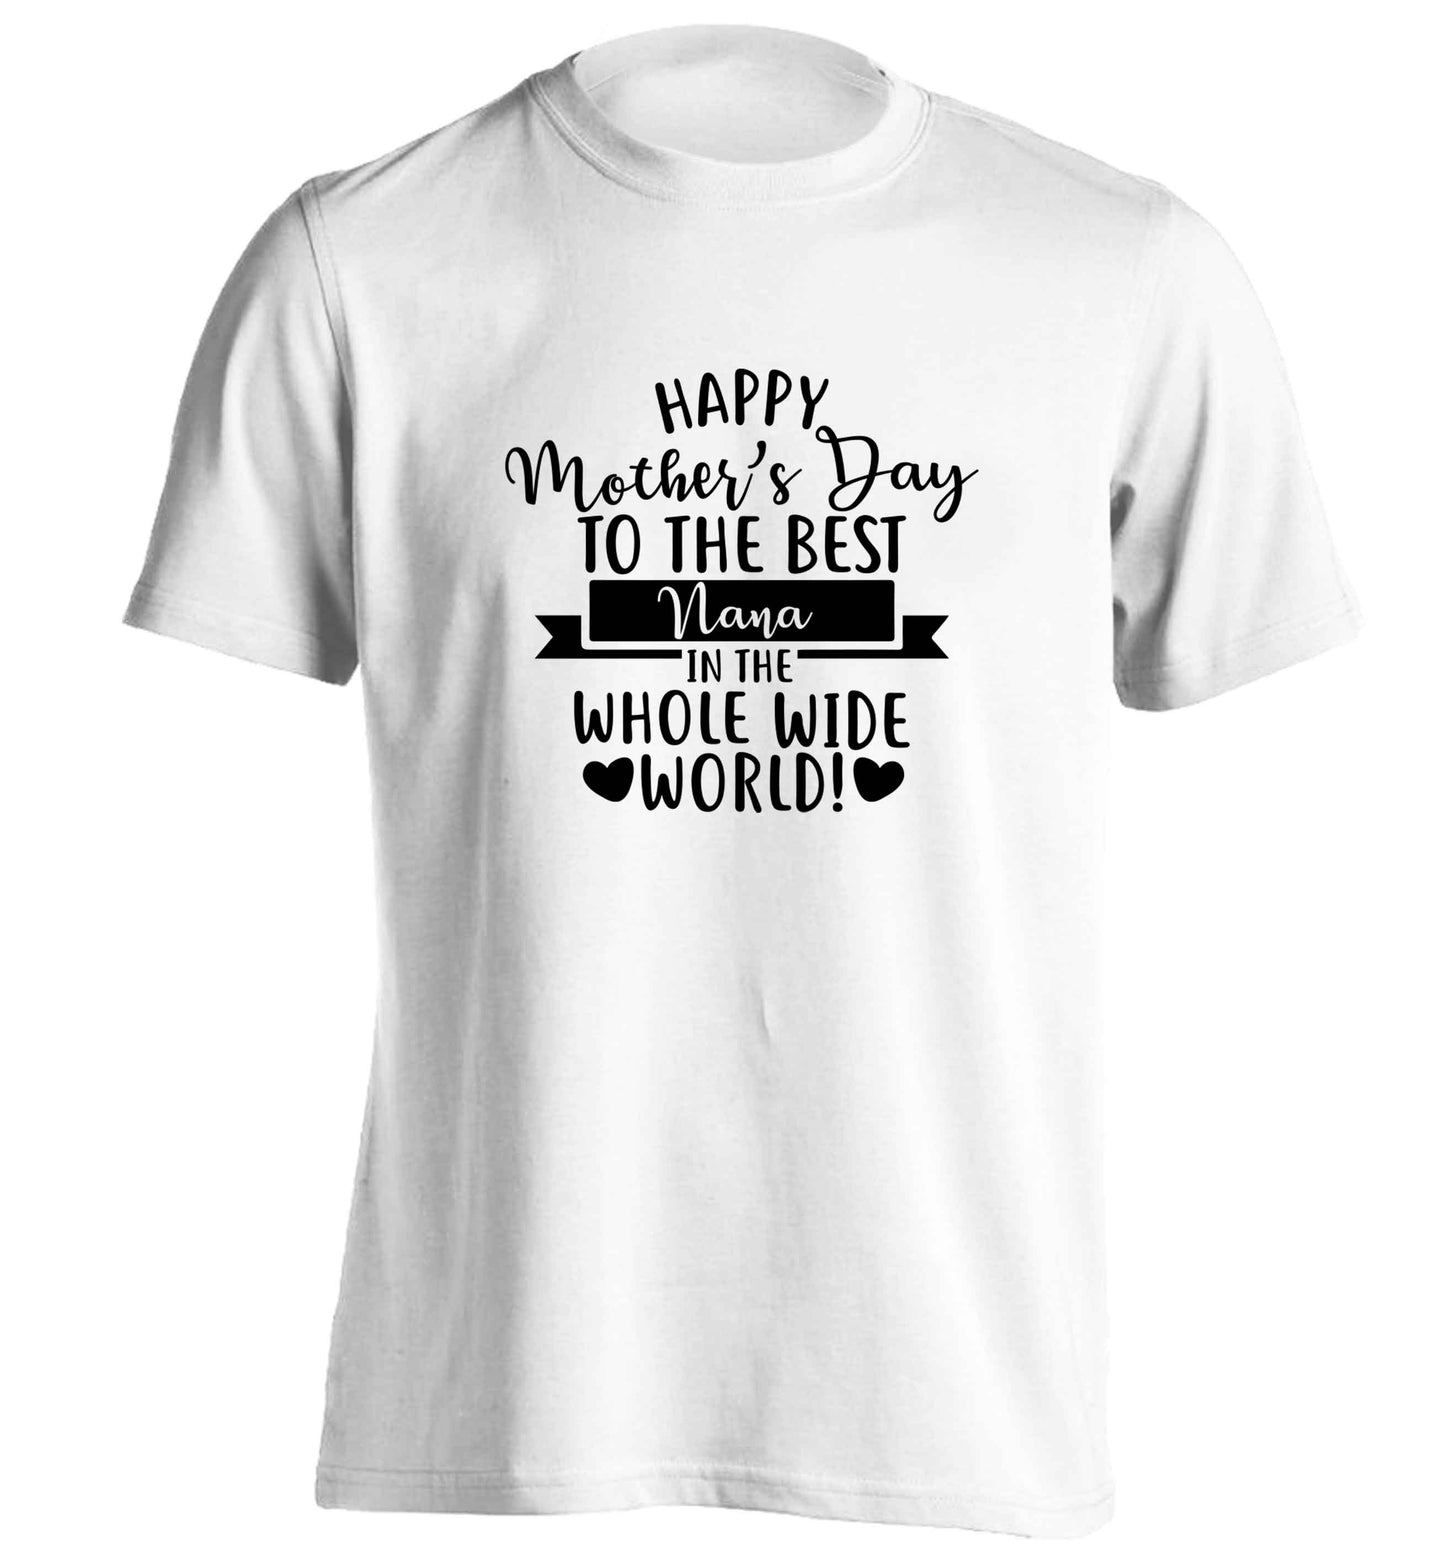 Happy mother's day to the best nana in the world adults unisex white Tshirt 2XL